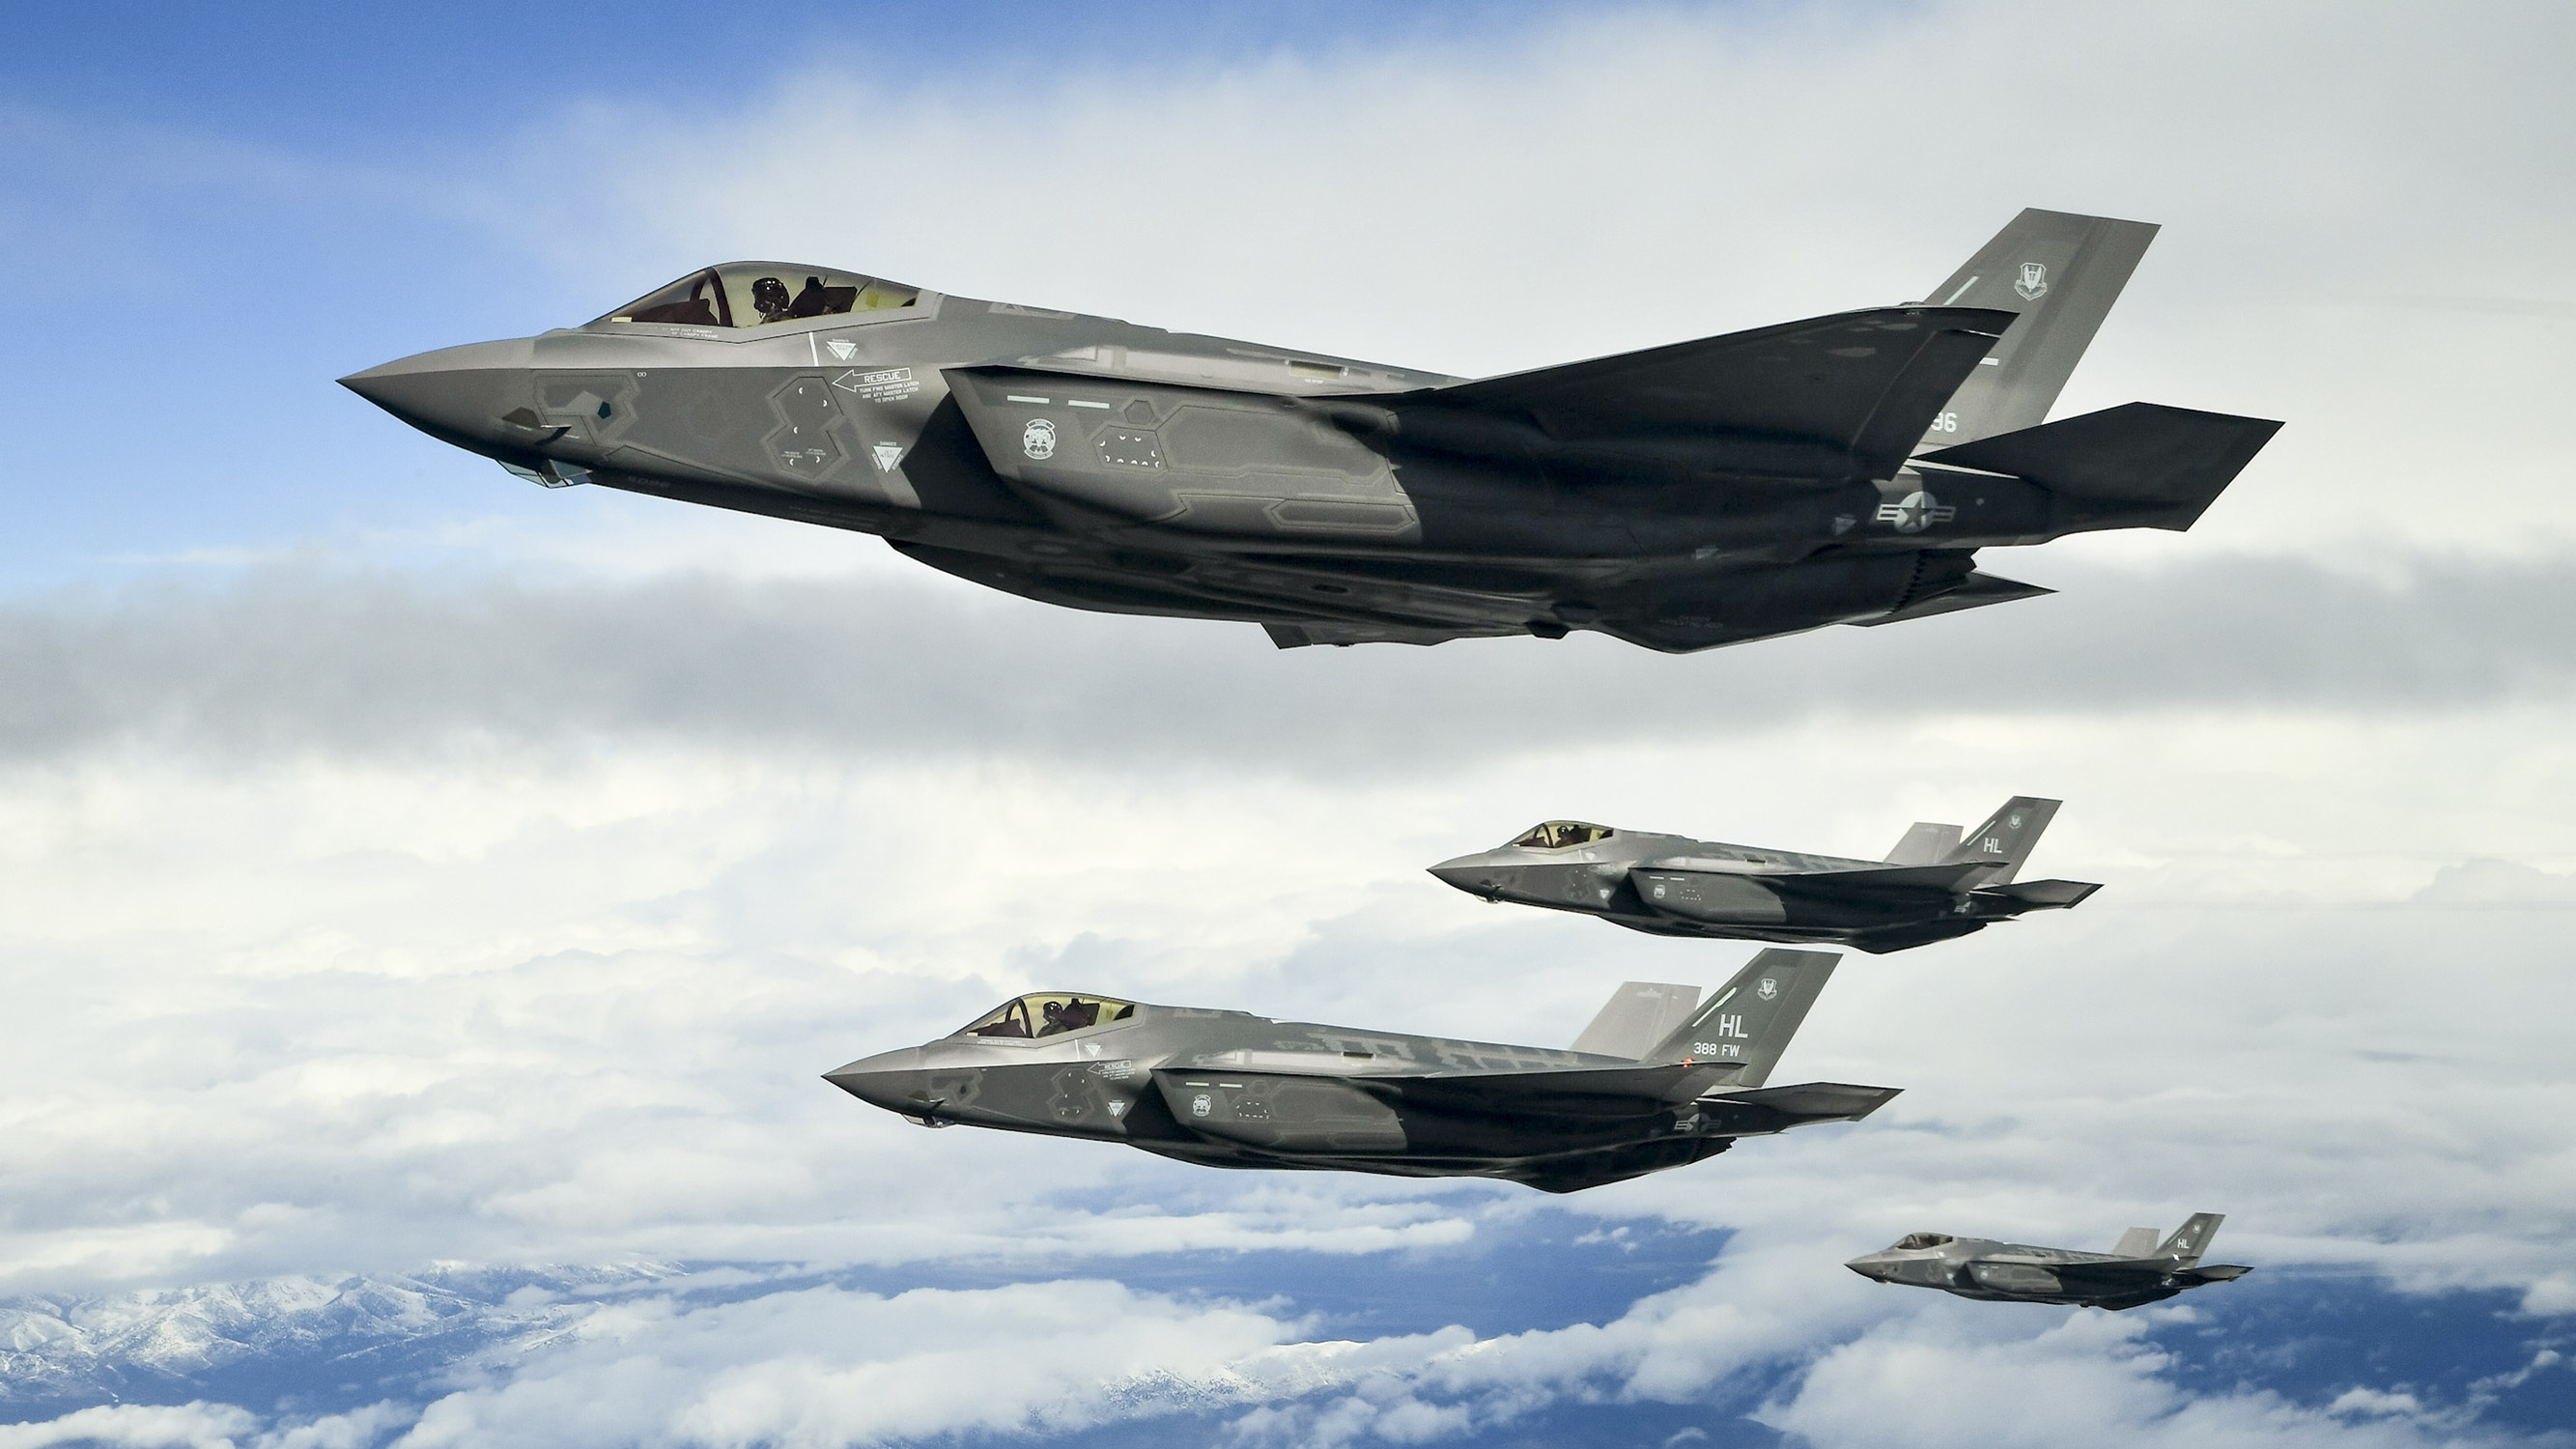 Pratt & Whitney will upgrade F135 engines for F-35 Lightning II fighters and save $40 billion